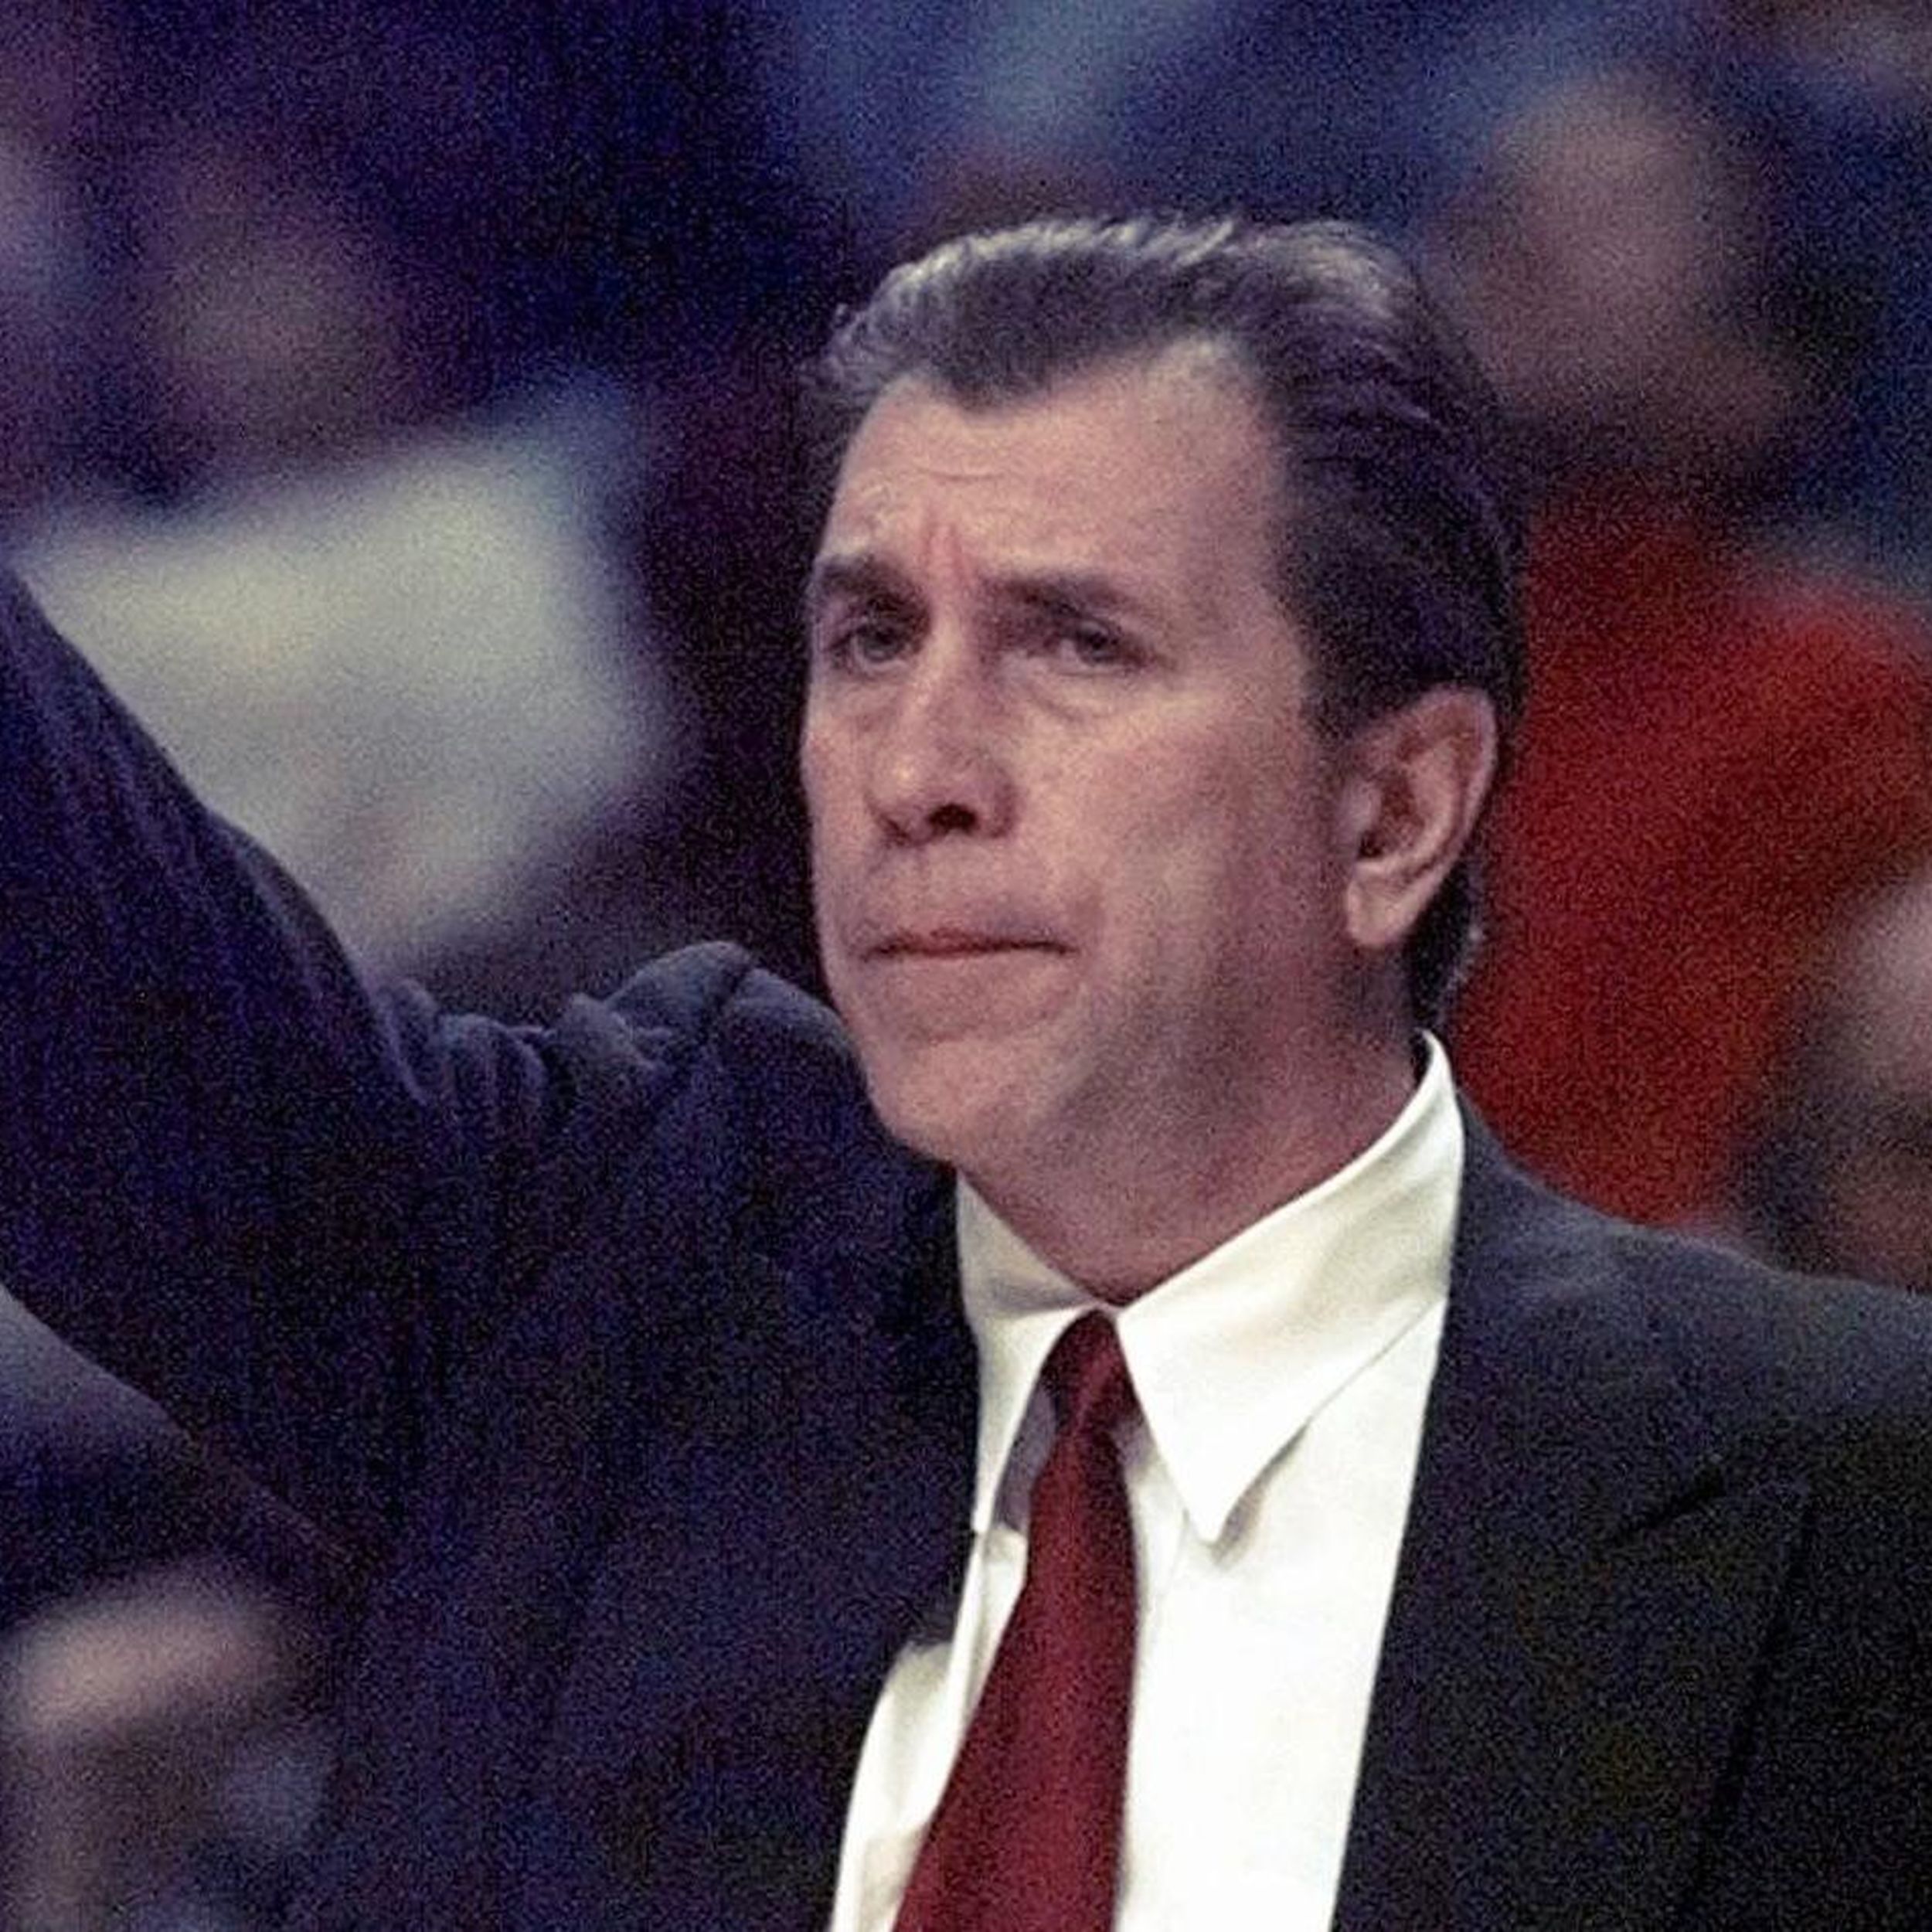 Rudy Tomjanovich: We Don't Have Any Control Over What Comes Into Our Head,  But We Have The Power To Stop It — 52 Weeks of Hope